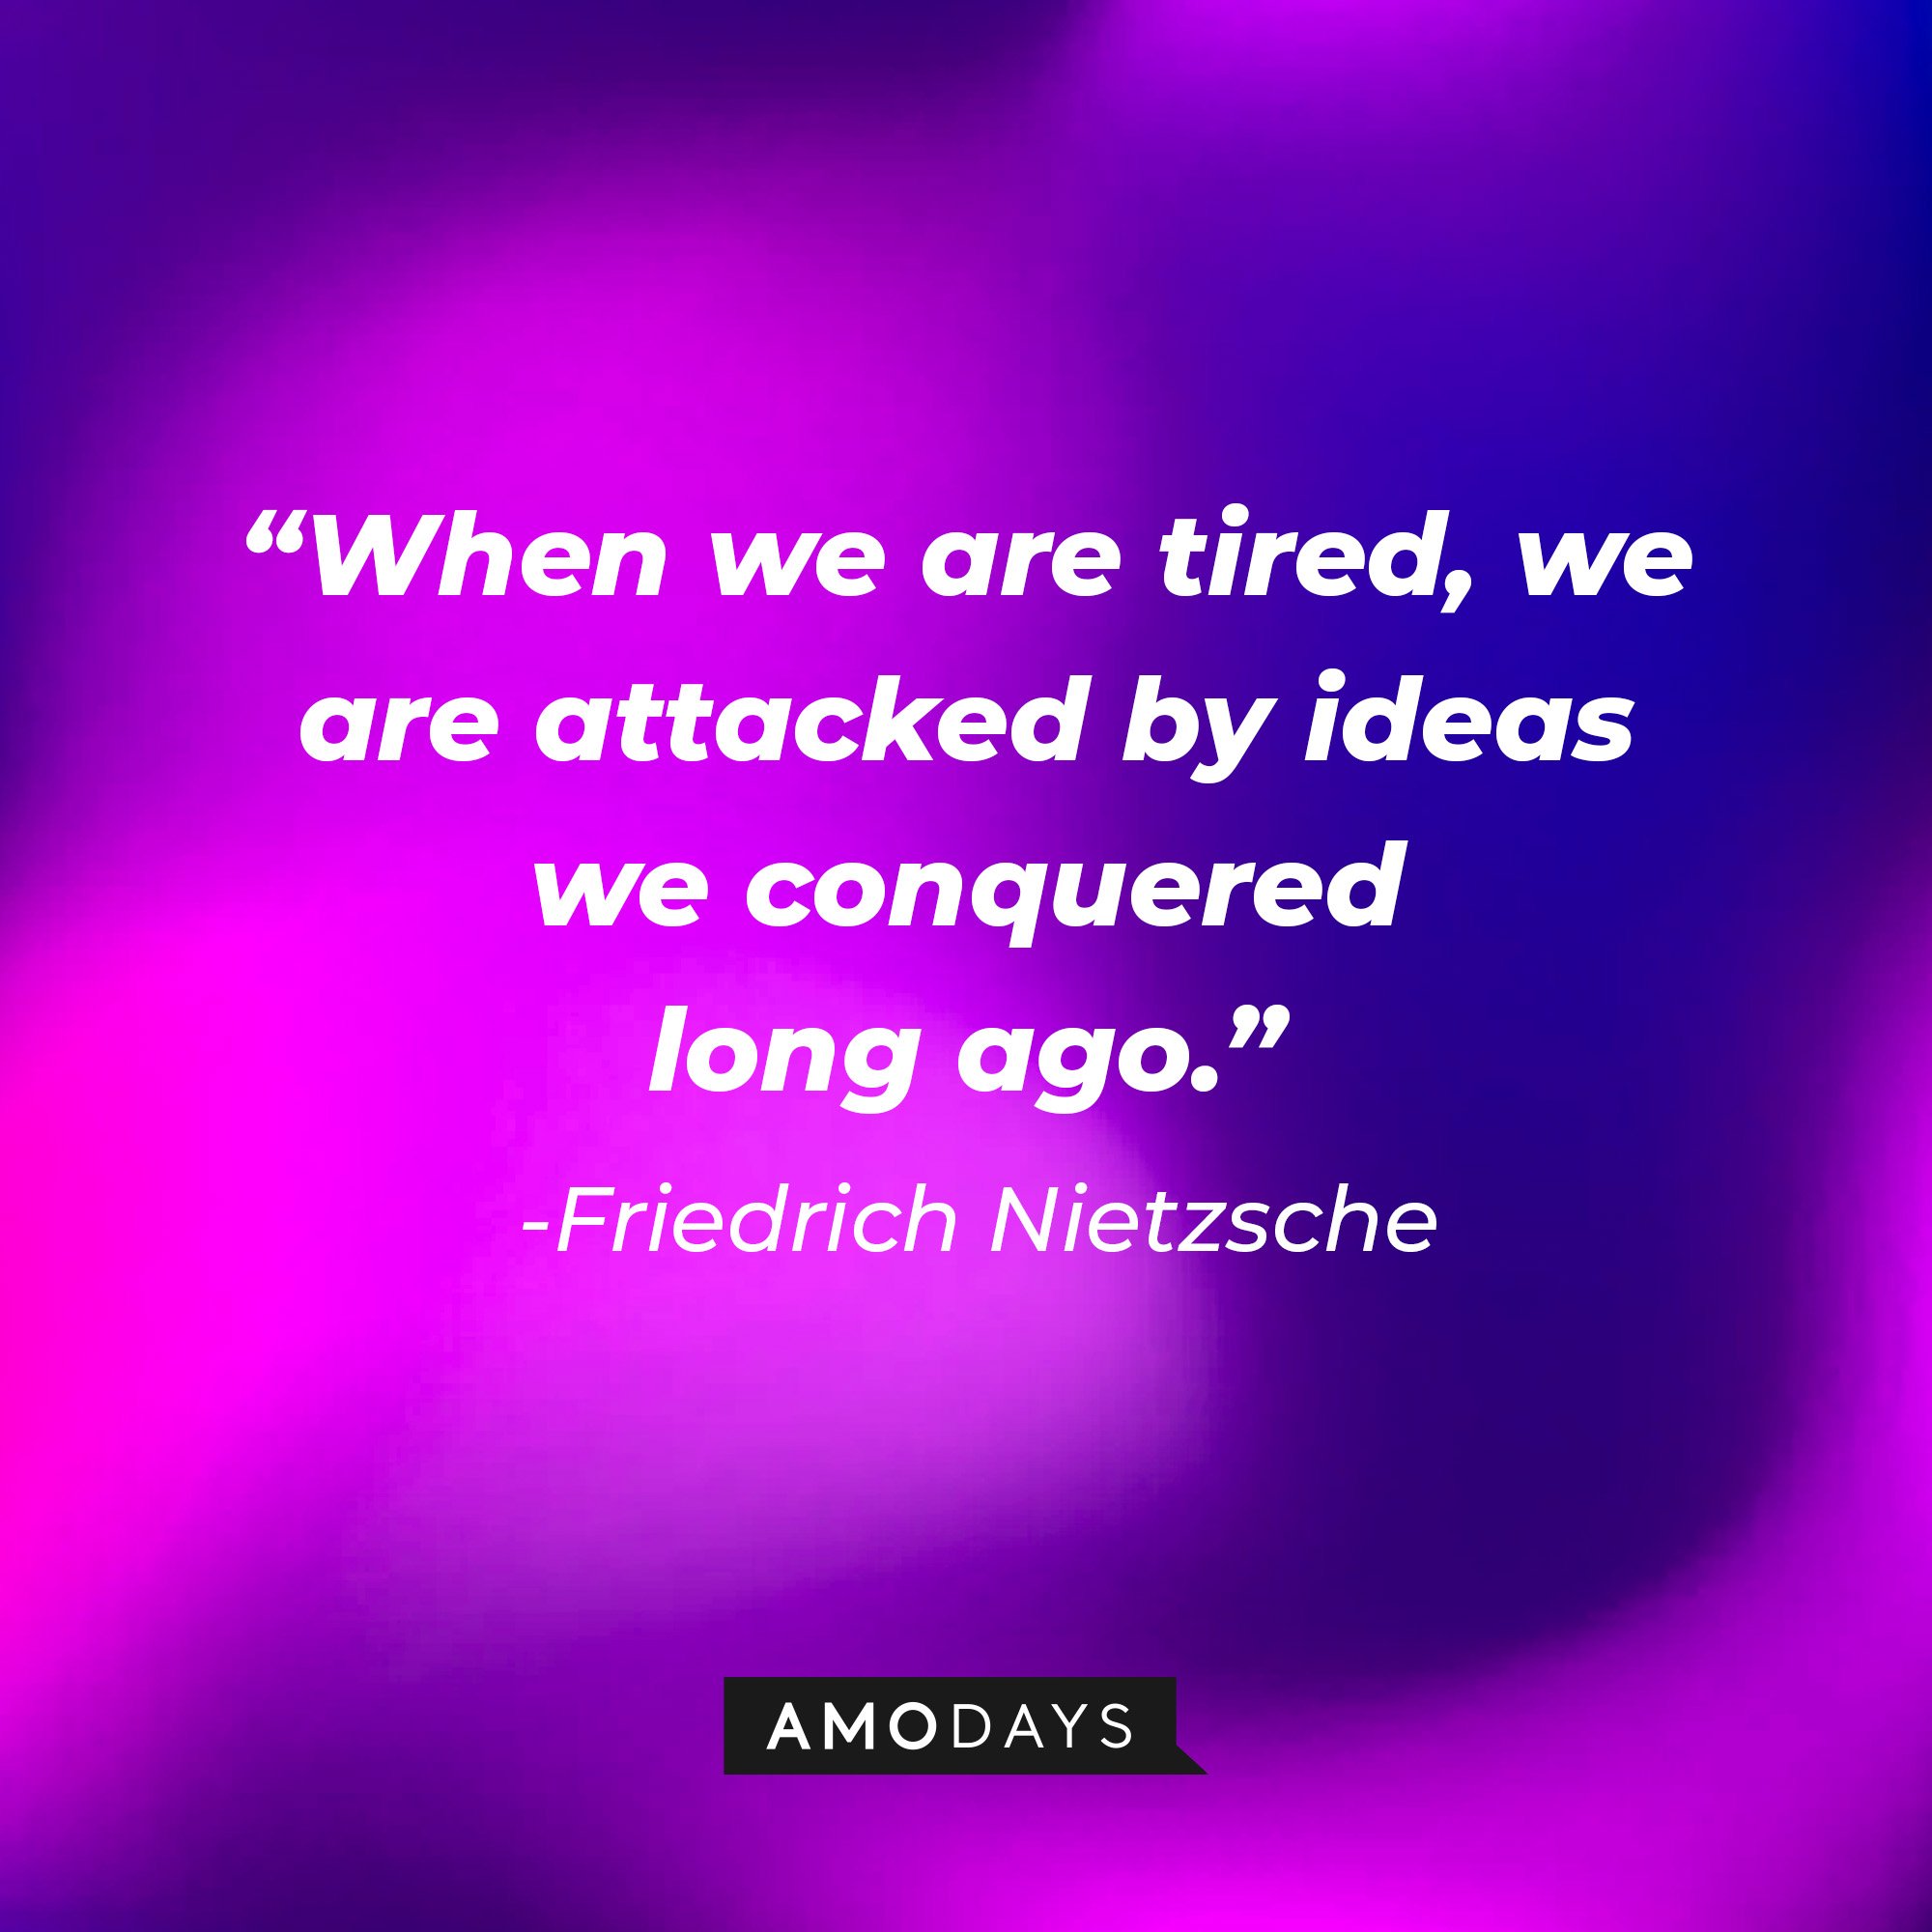 Friedrich Nietzsche's quote: “When we are tired, we are attacked by ideas we conquered long ago.” | Image: AmoDays